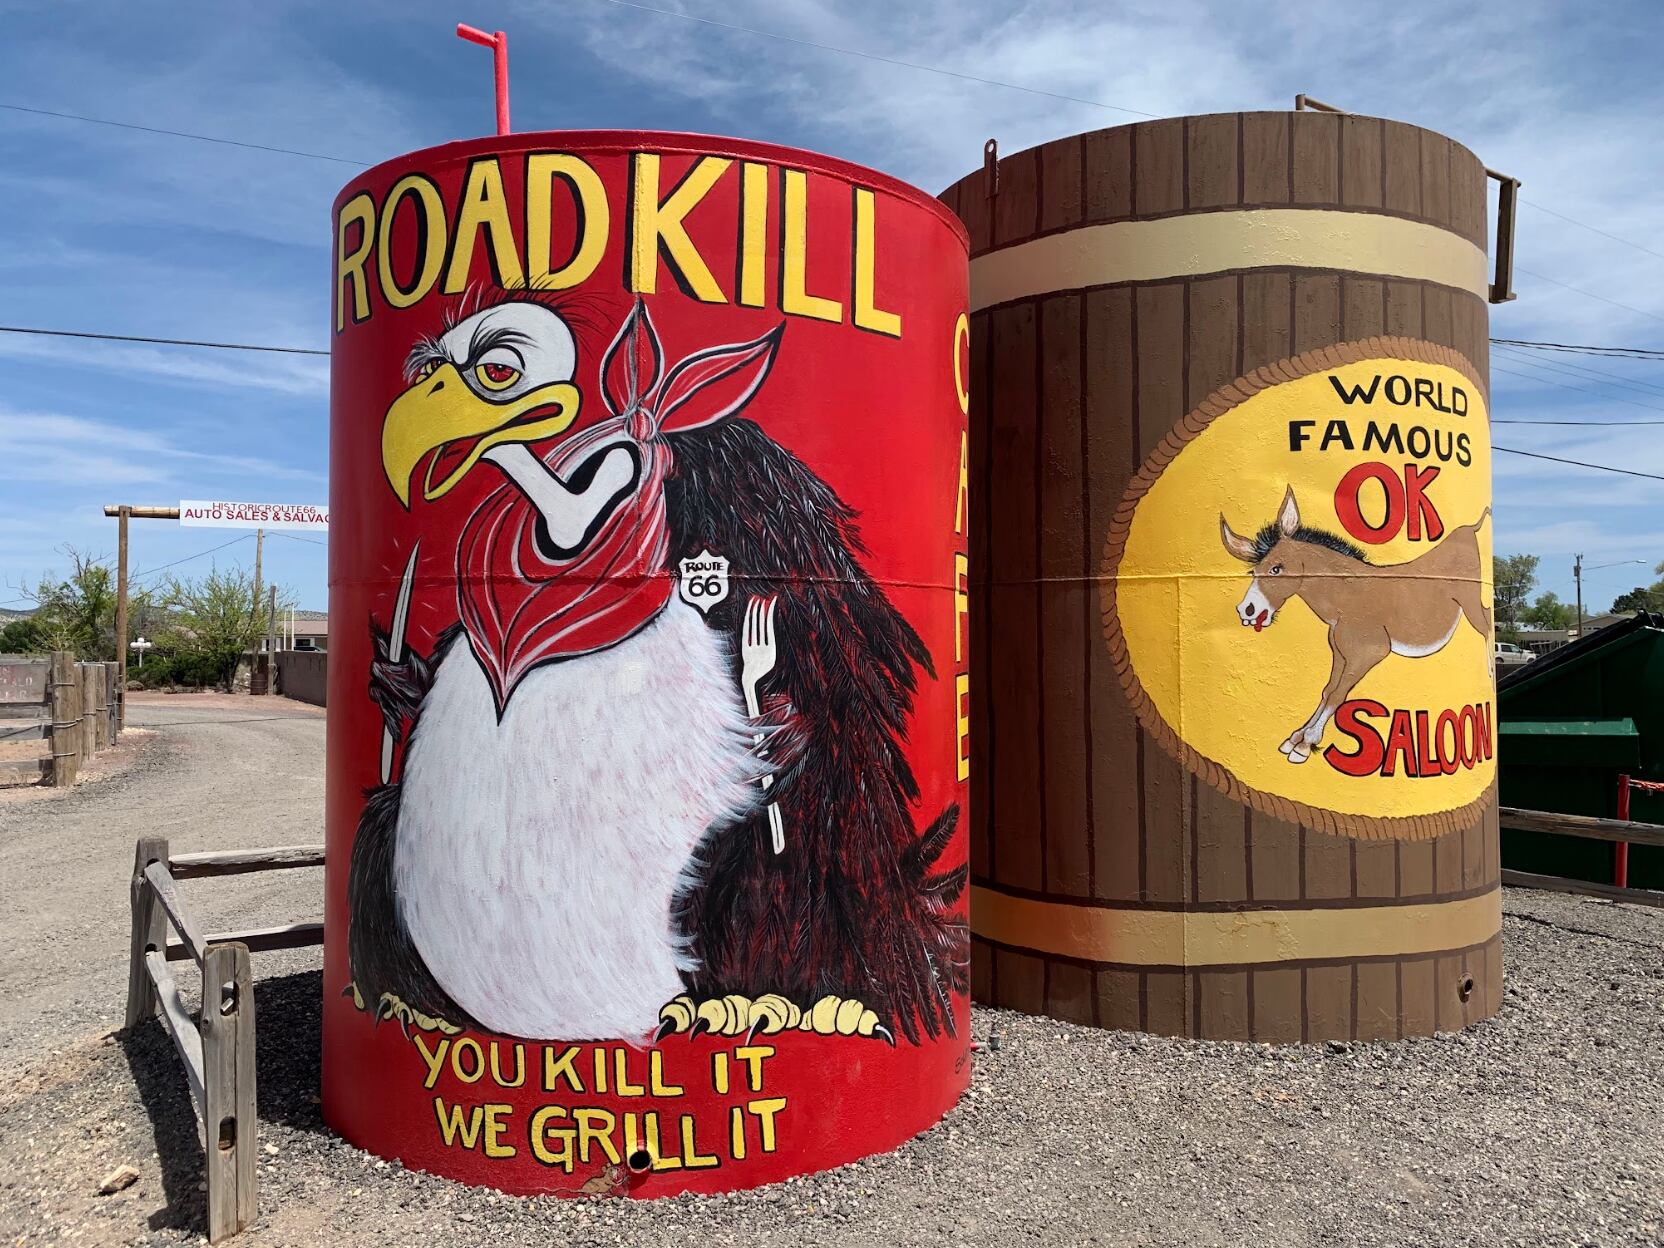 Giant barrel murals welcome travelers to the famed Roadkill Cafe and O.K. Saloon in  Seligman, AZ.